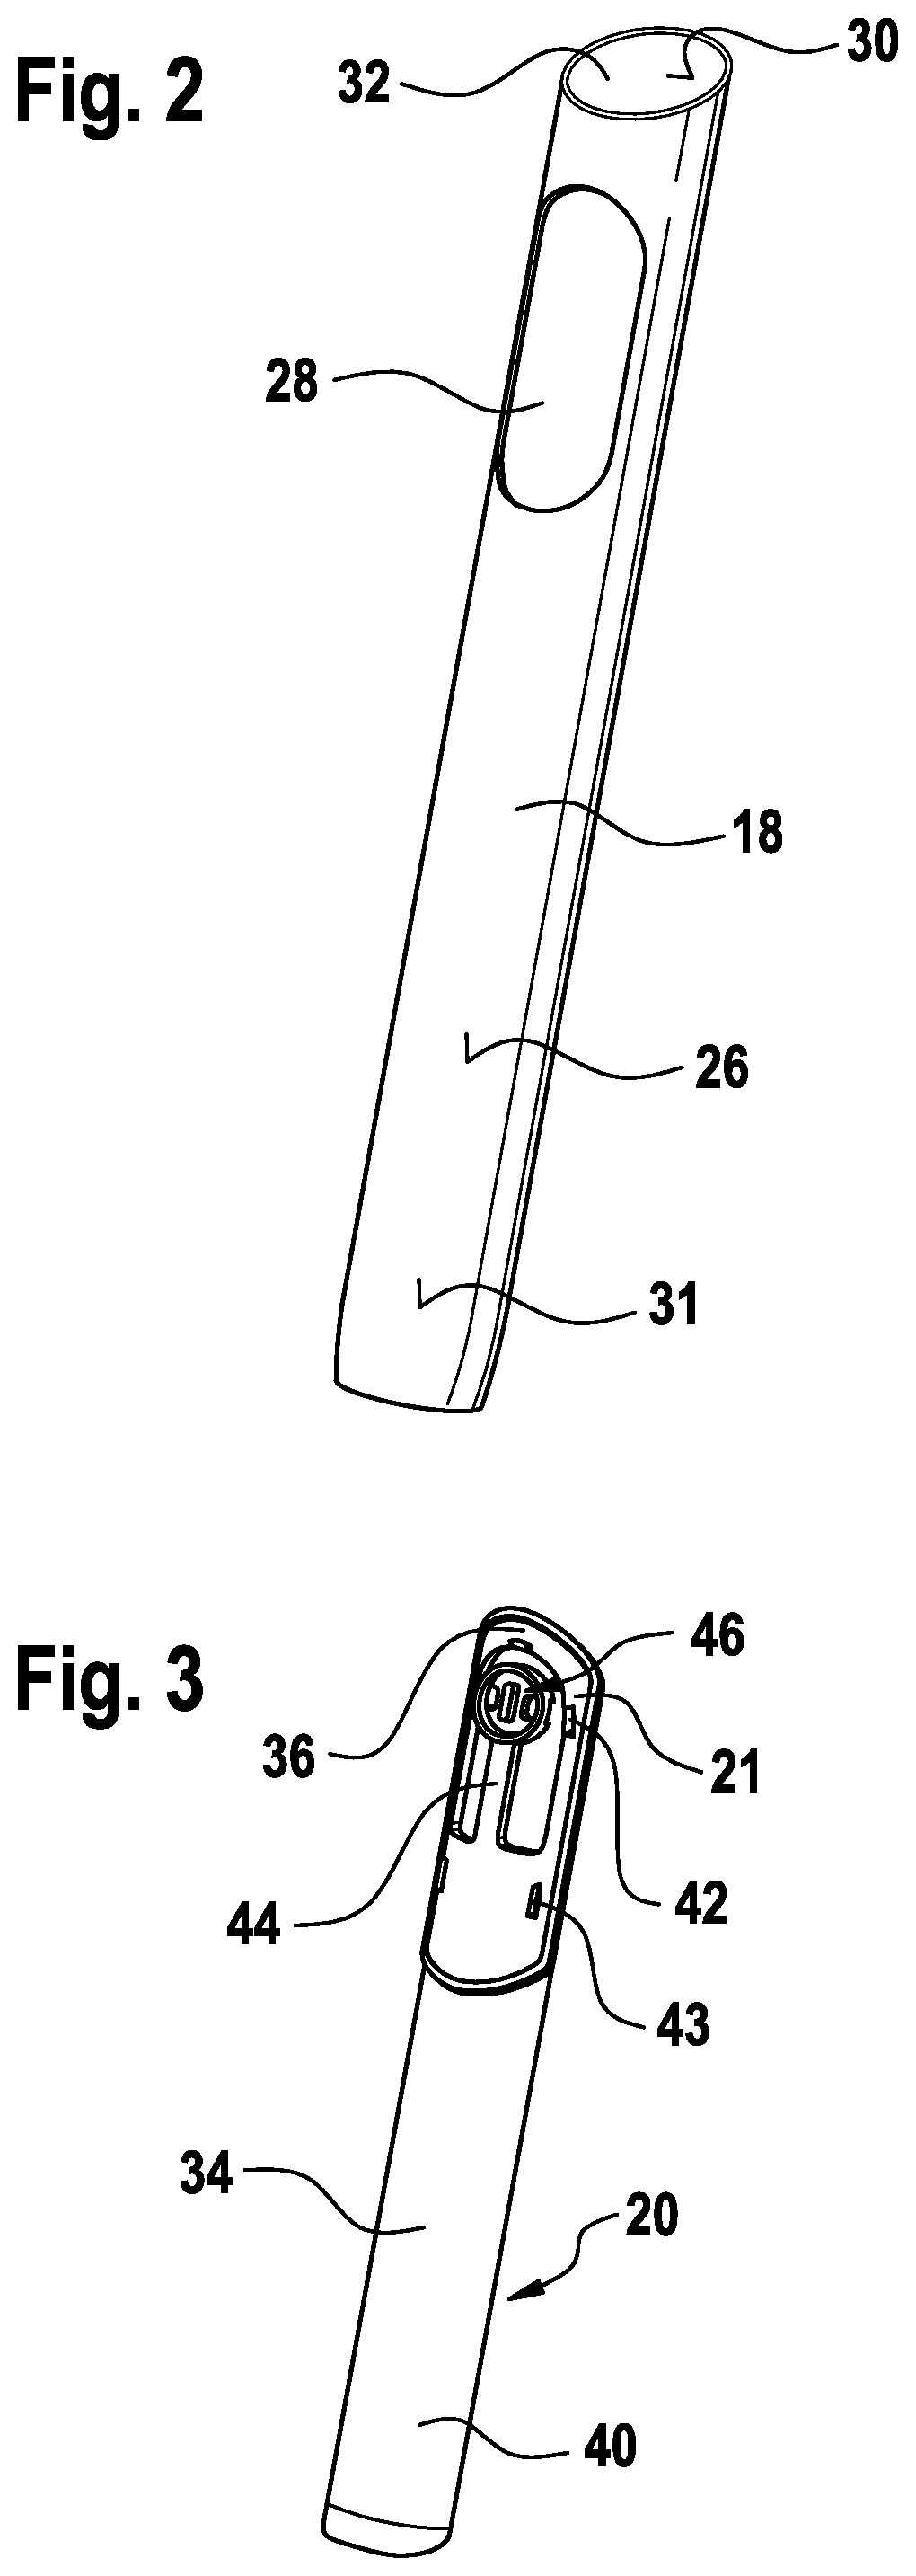 Method for making a handle for an electrically operated personal care implement